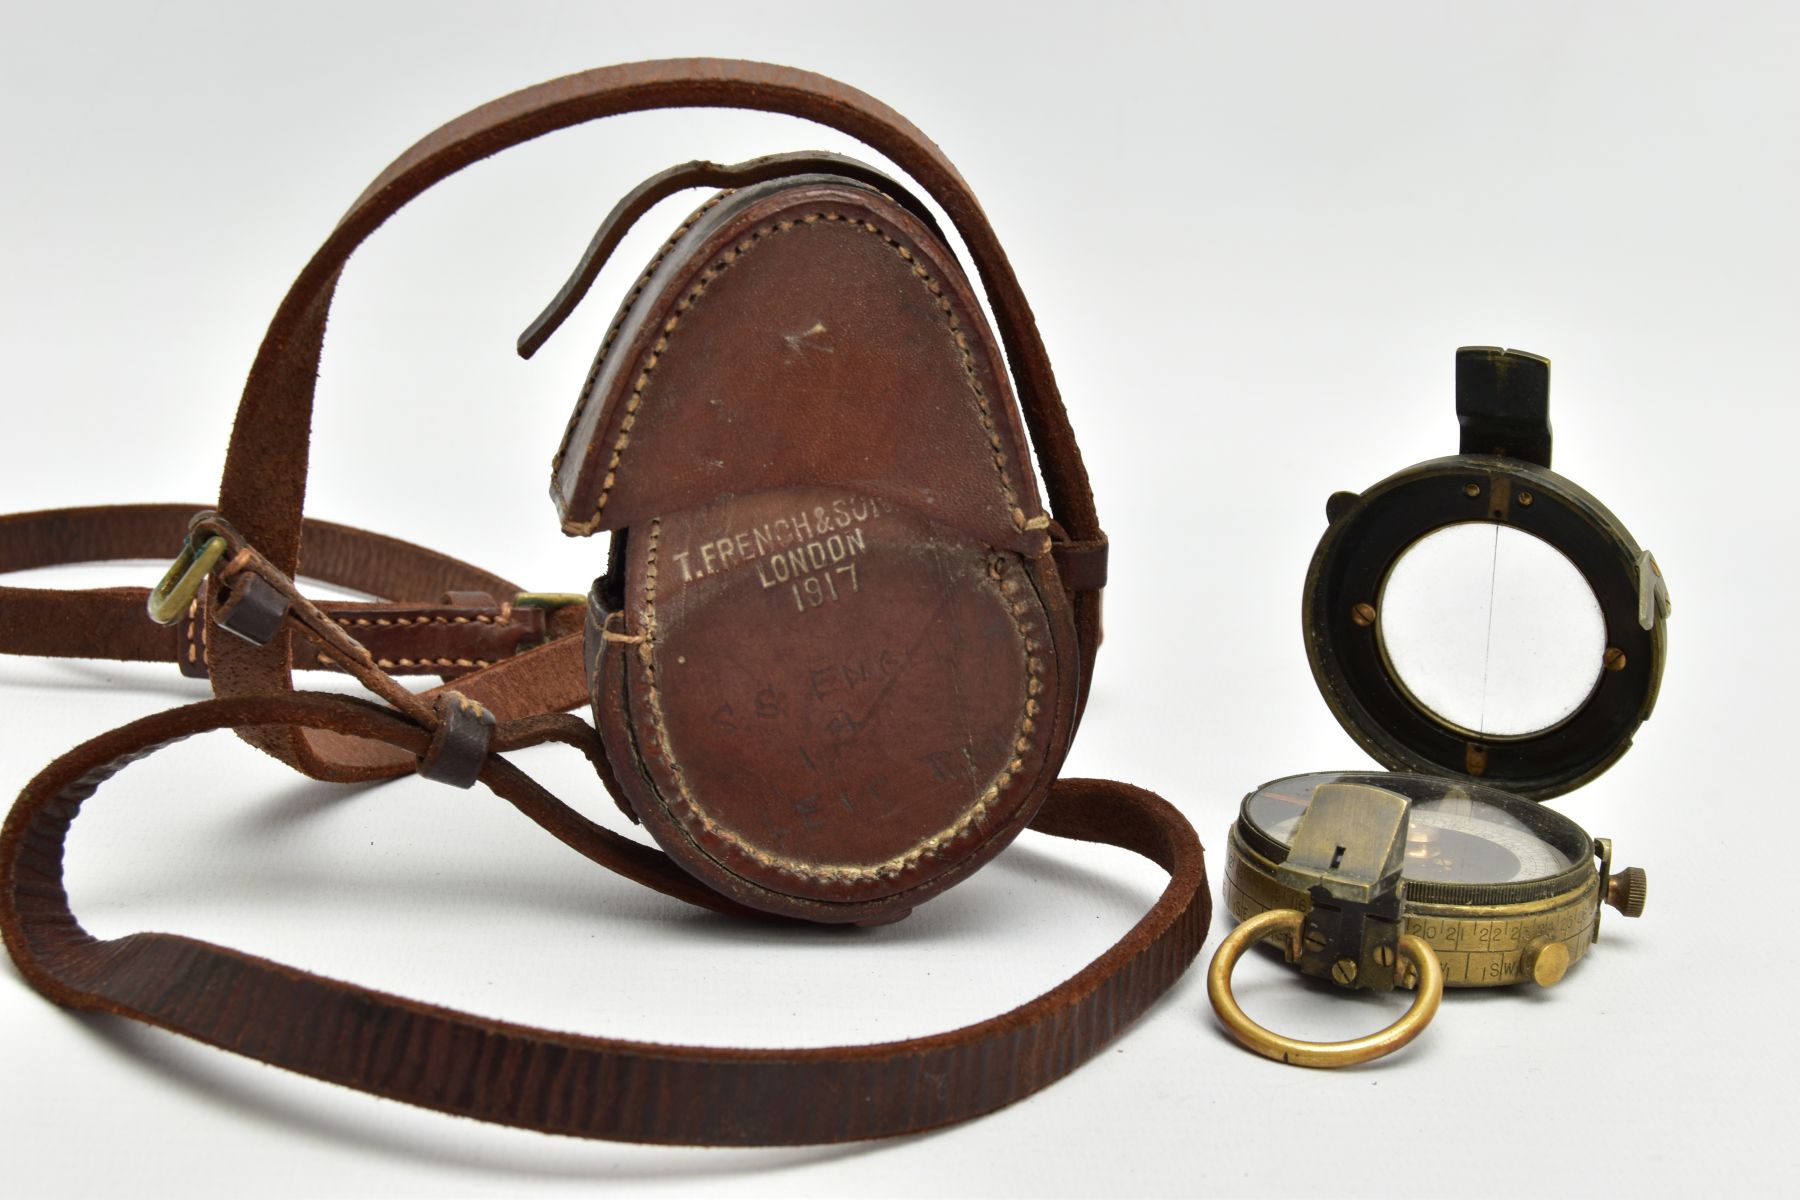 A WORLD WAR ONE ERA FIELD COMPASS, WAR OFFICE, DATED 1917, in its correct brown leather carrying - Image 5 of 6